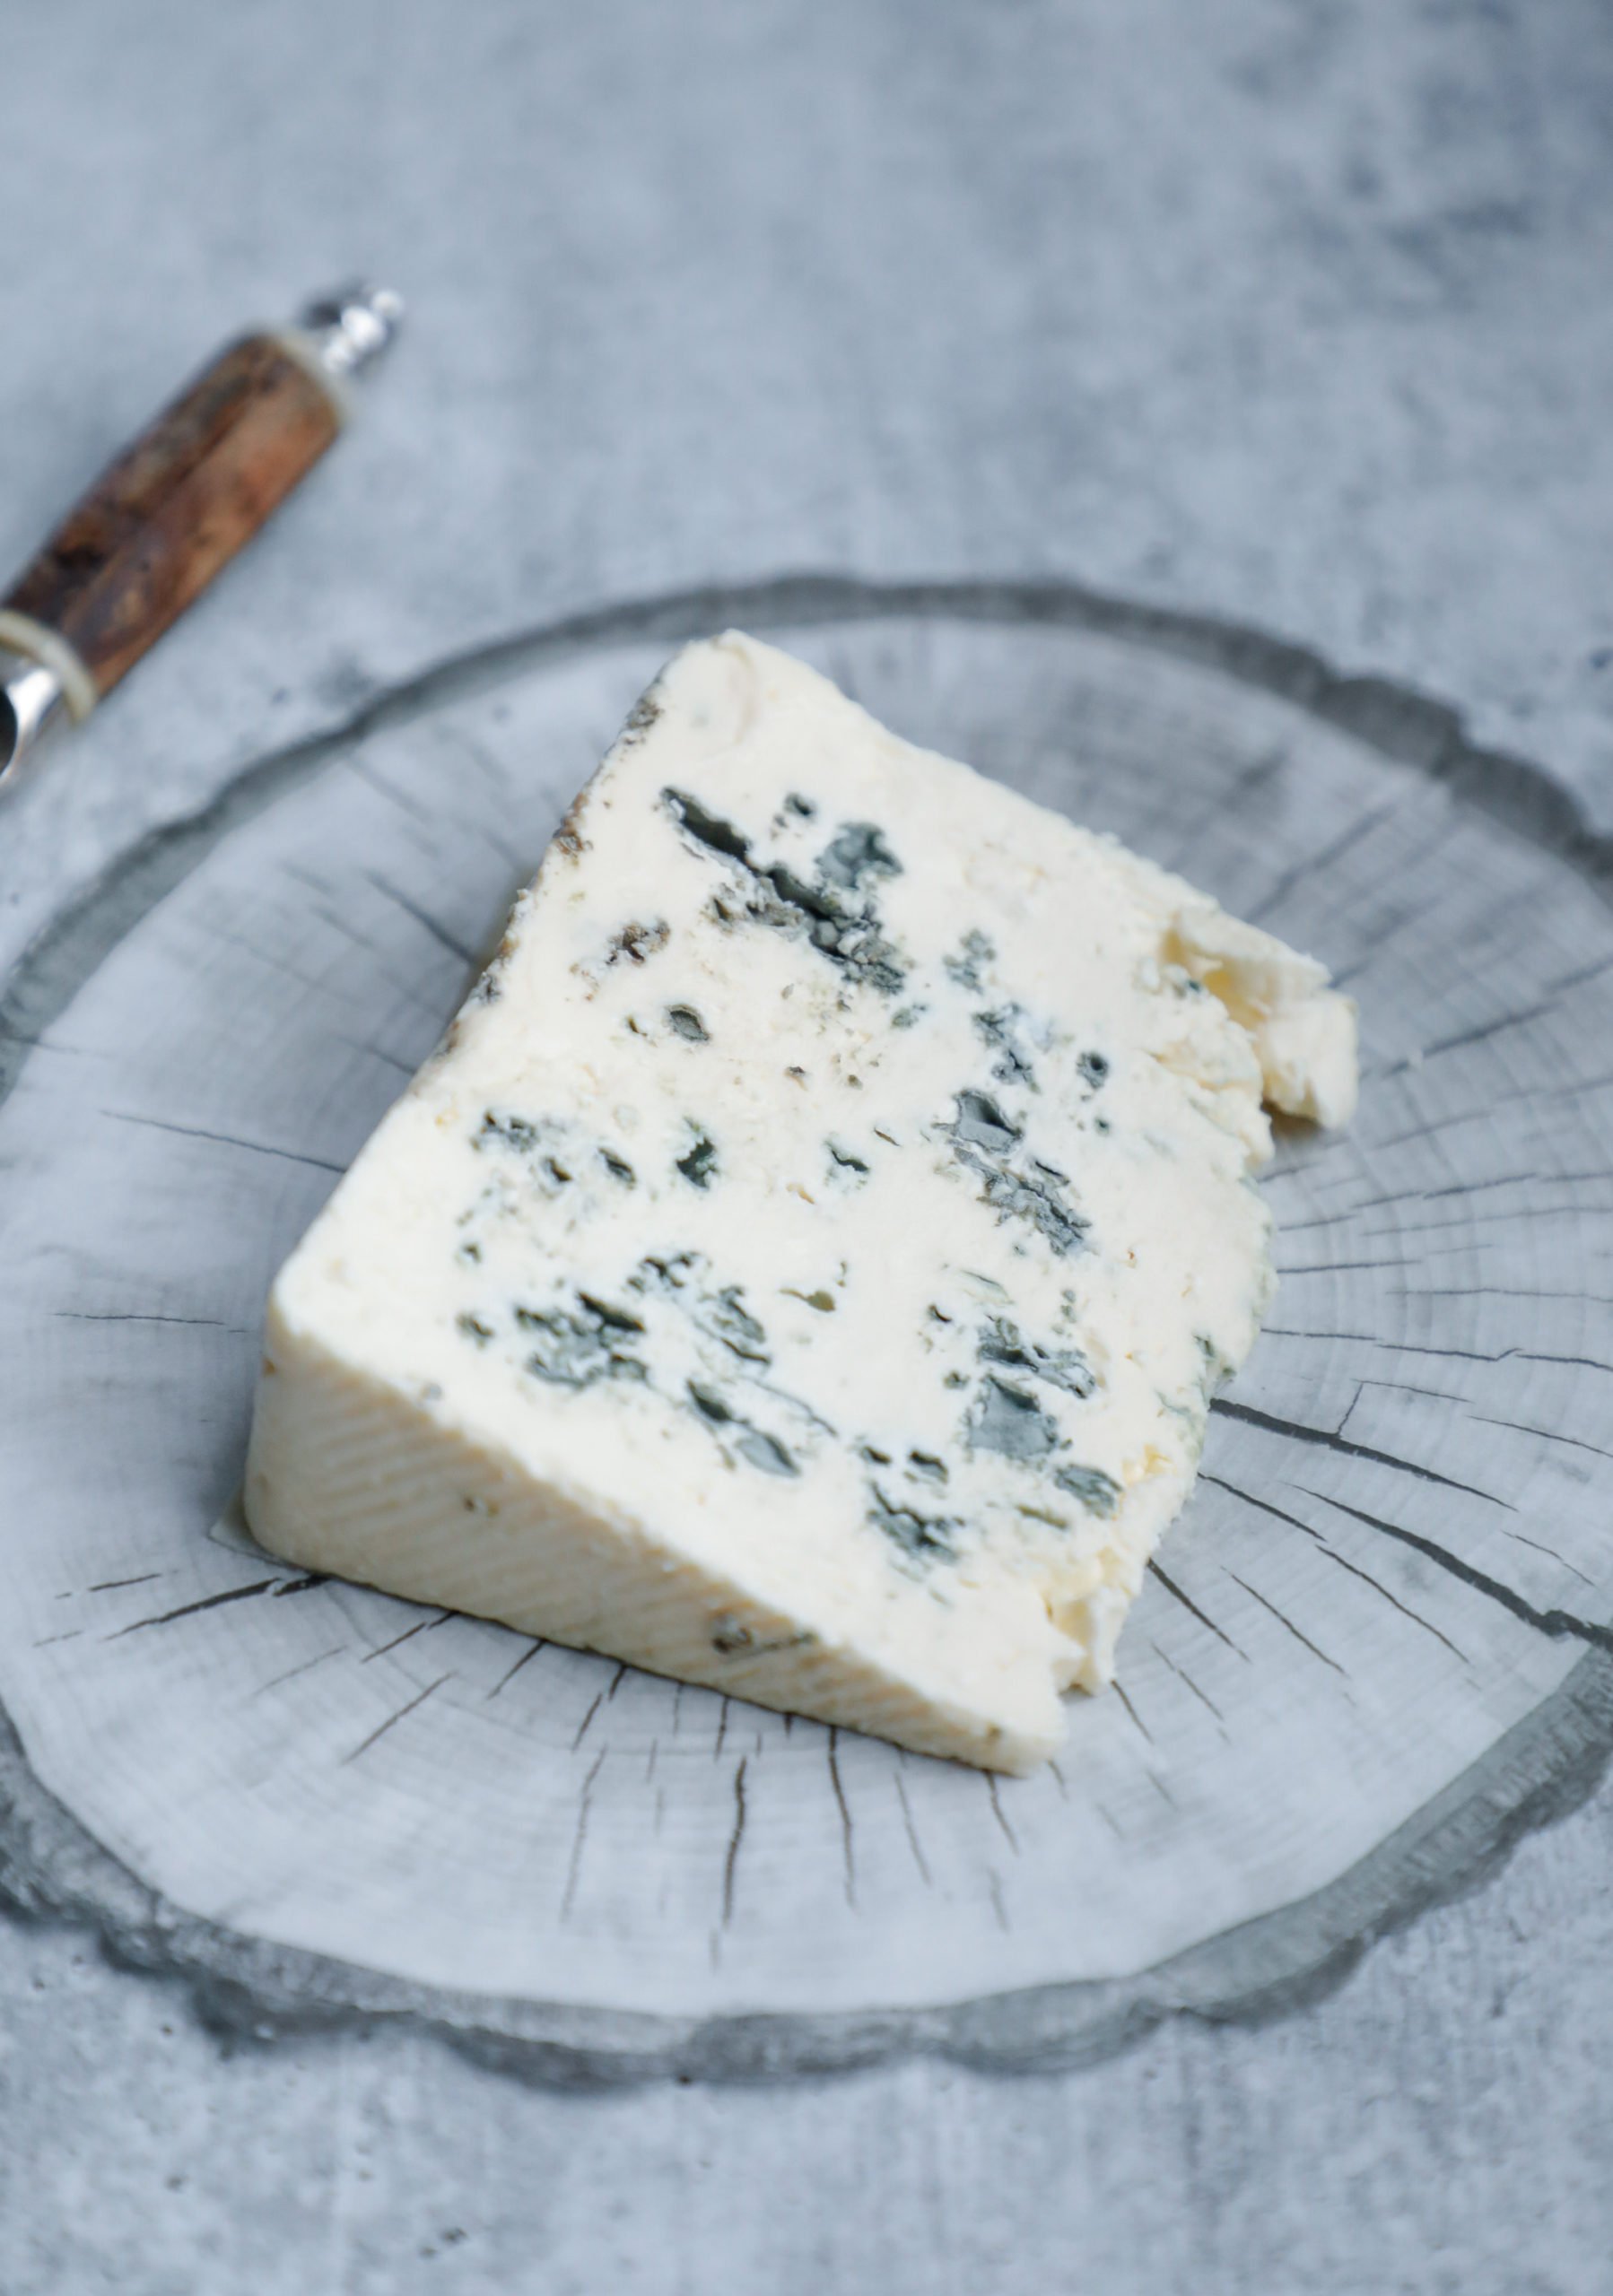 A slice of gorgonzola laying on its side showing the veining and texture 